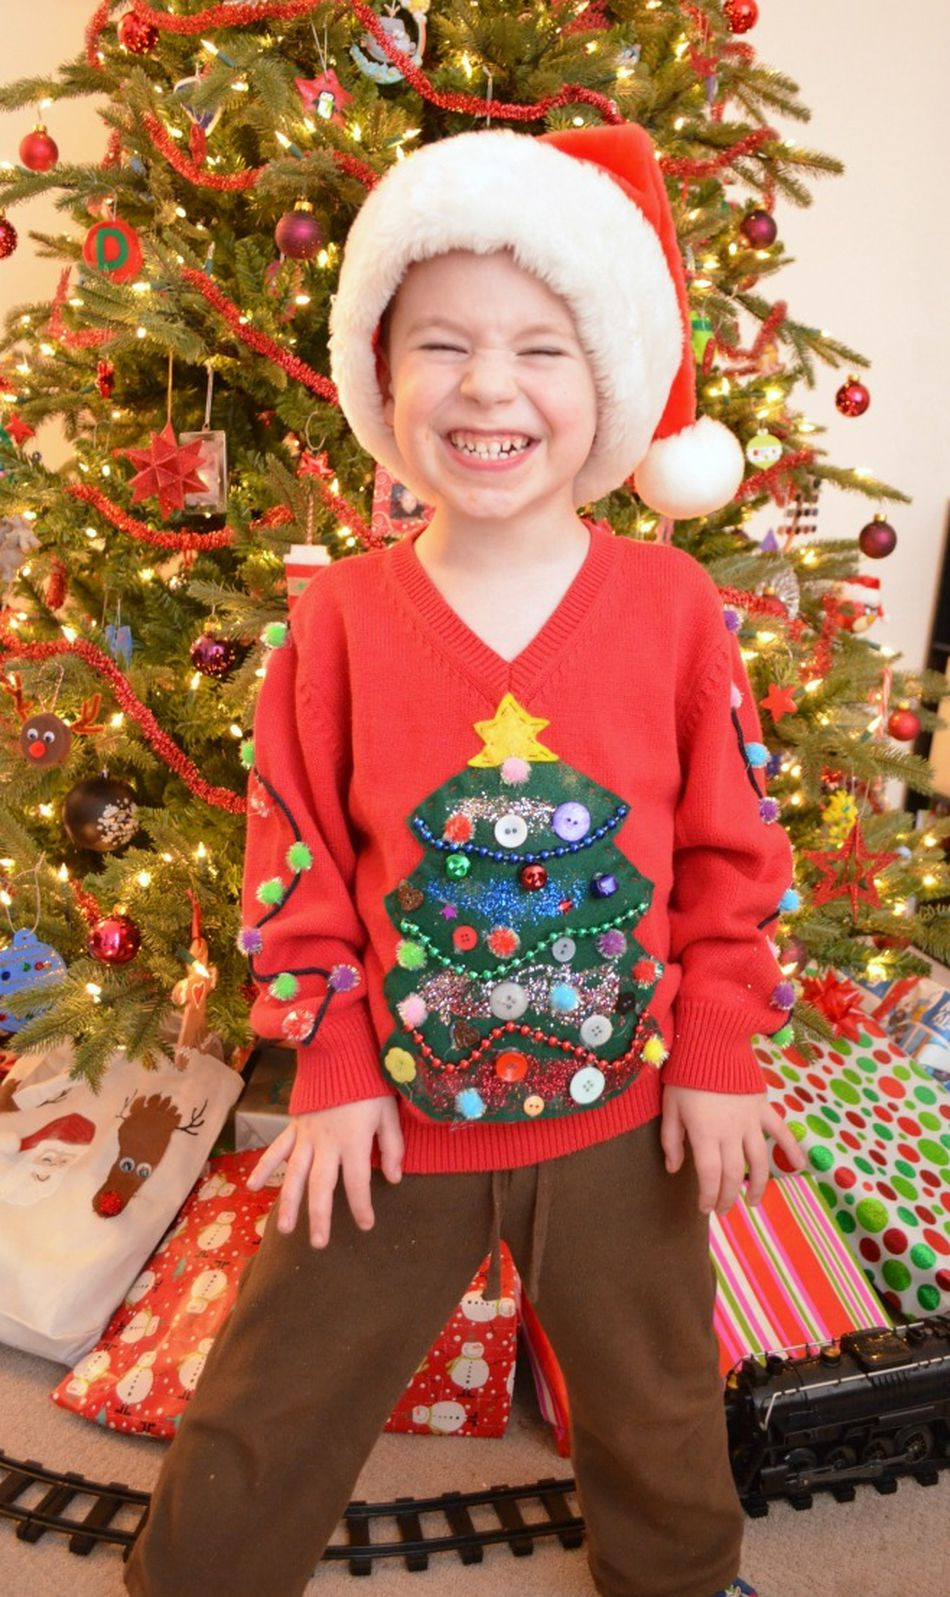 Toddler Ugly Christmas Sweater DIY
 15 DIY Ugly Christmas Sweater Ideas for Adults and Kids